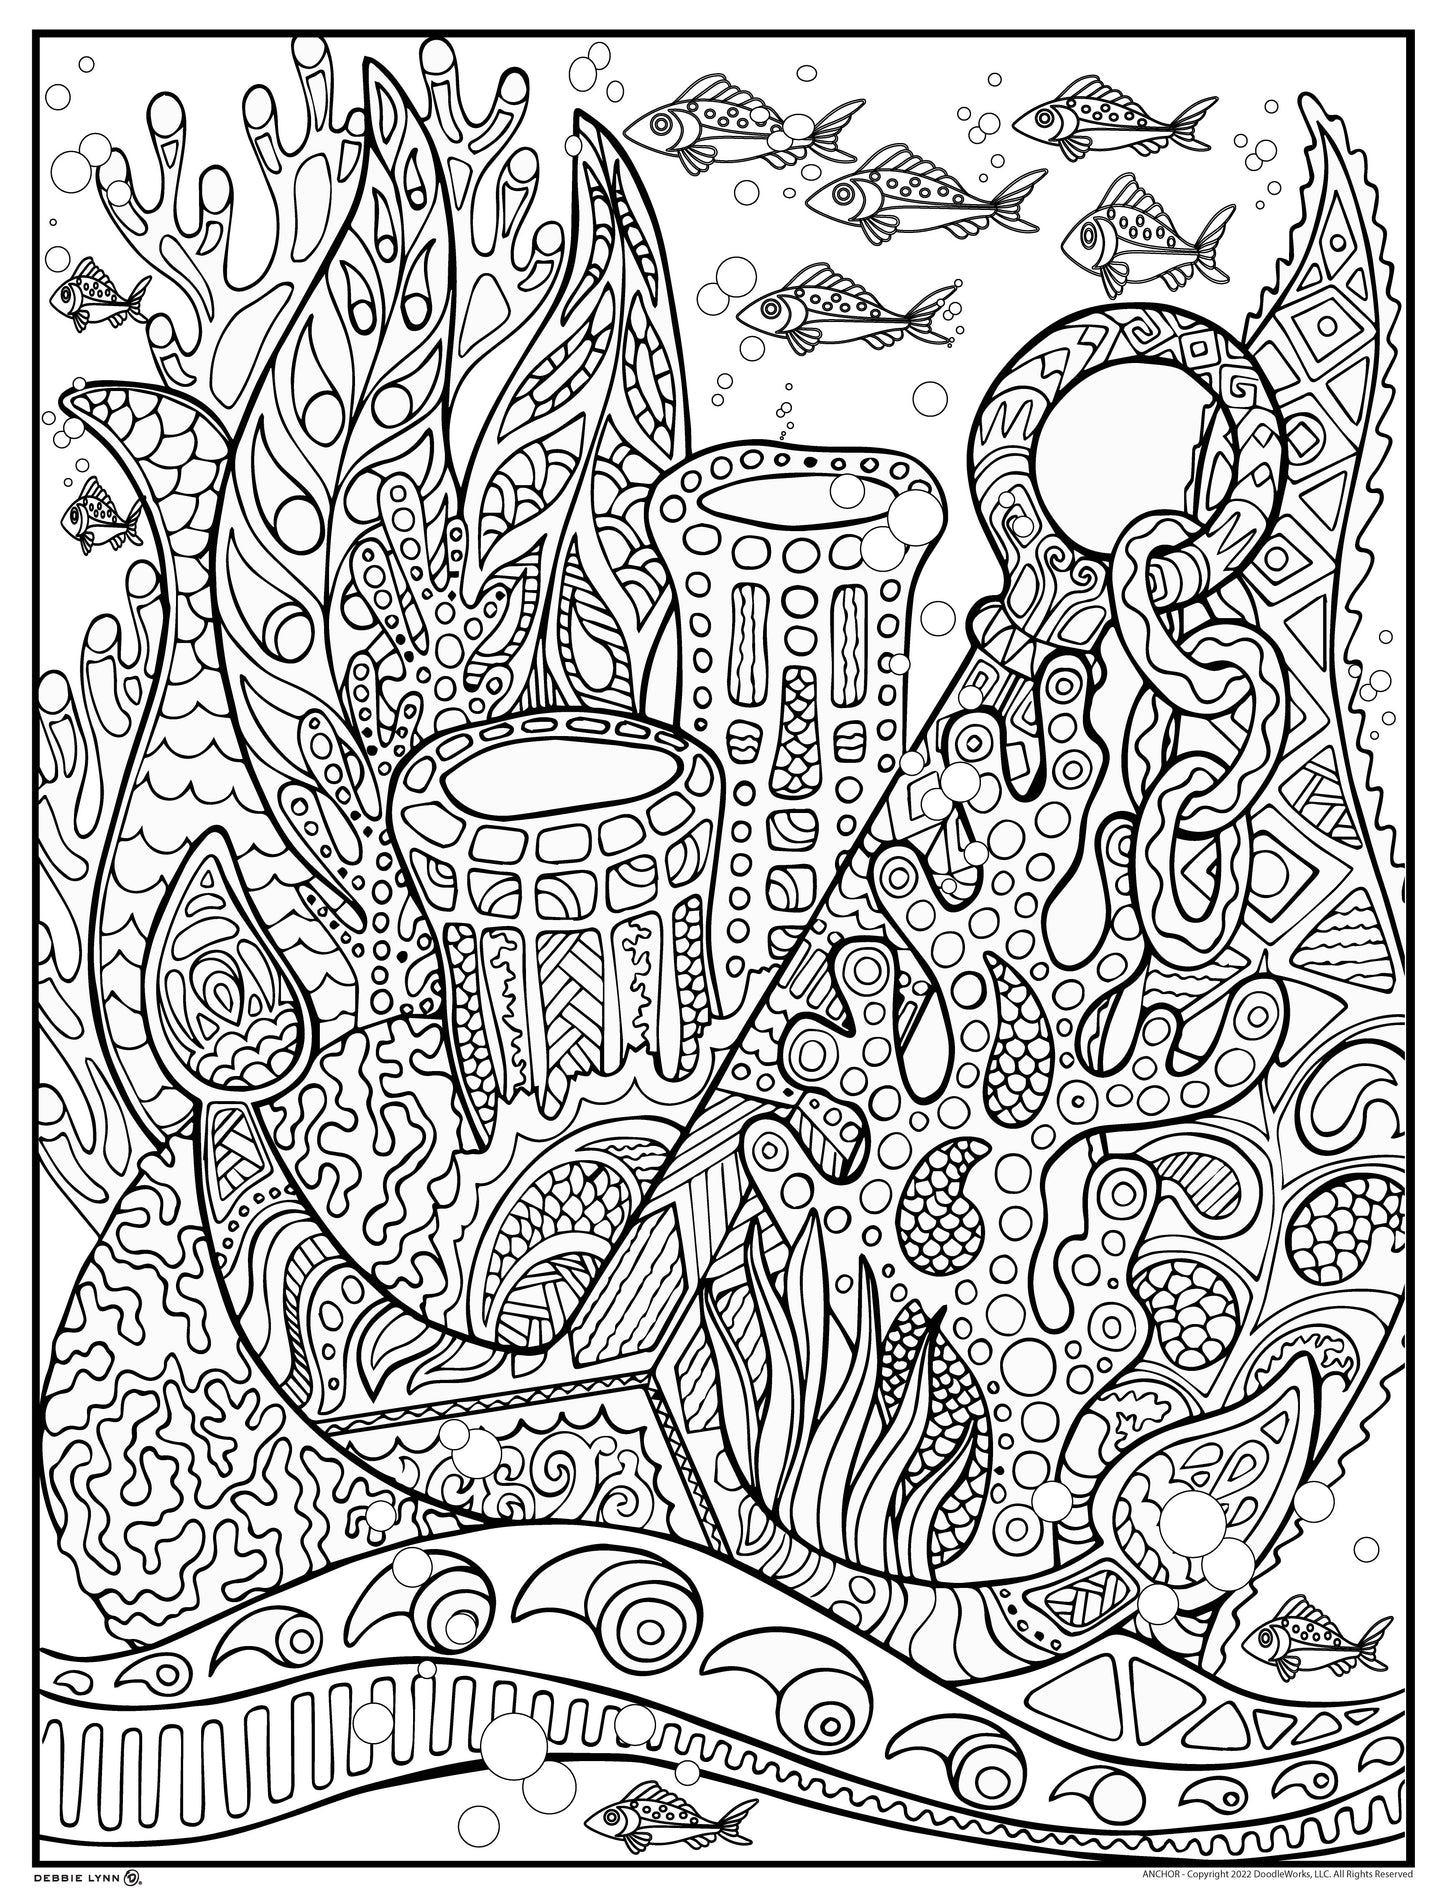 Anchor Personalized Giant Coloring Poster 46"x60"